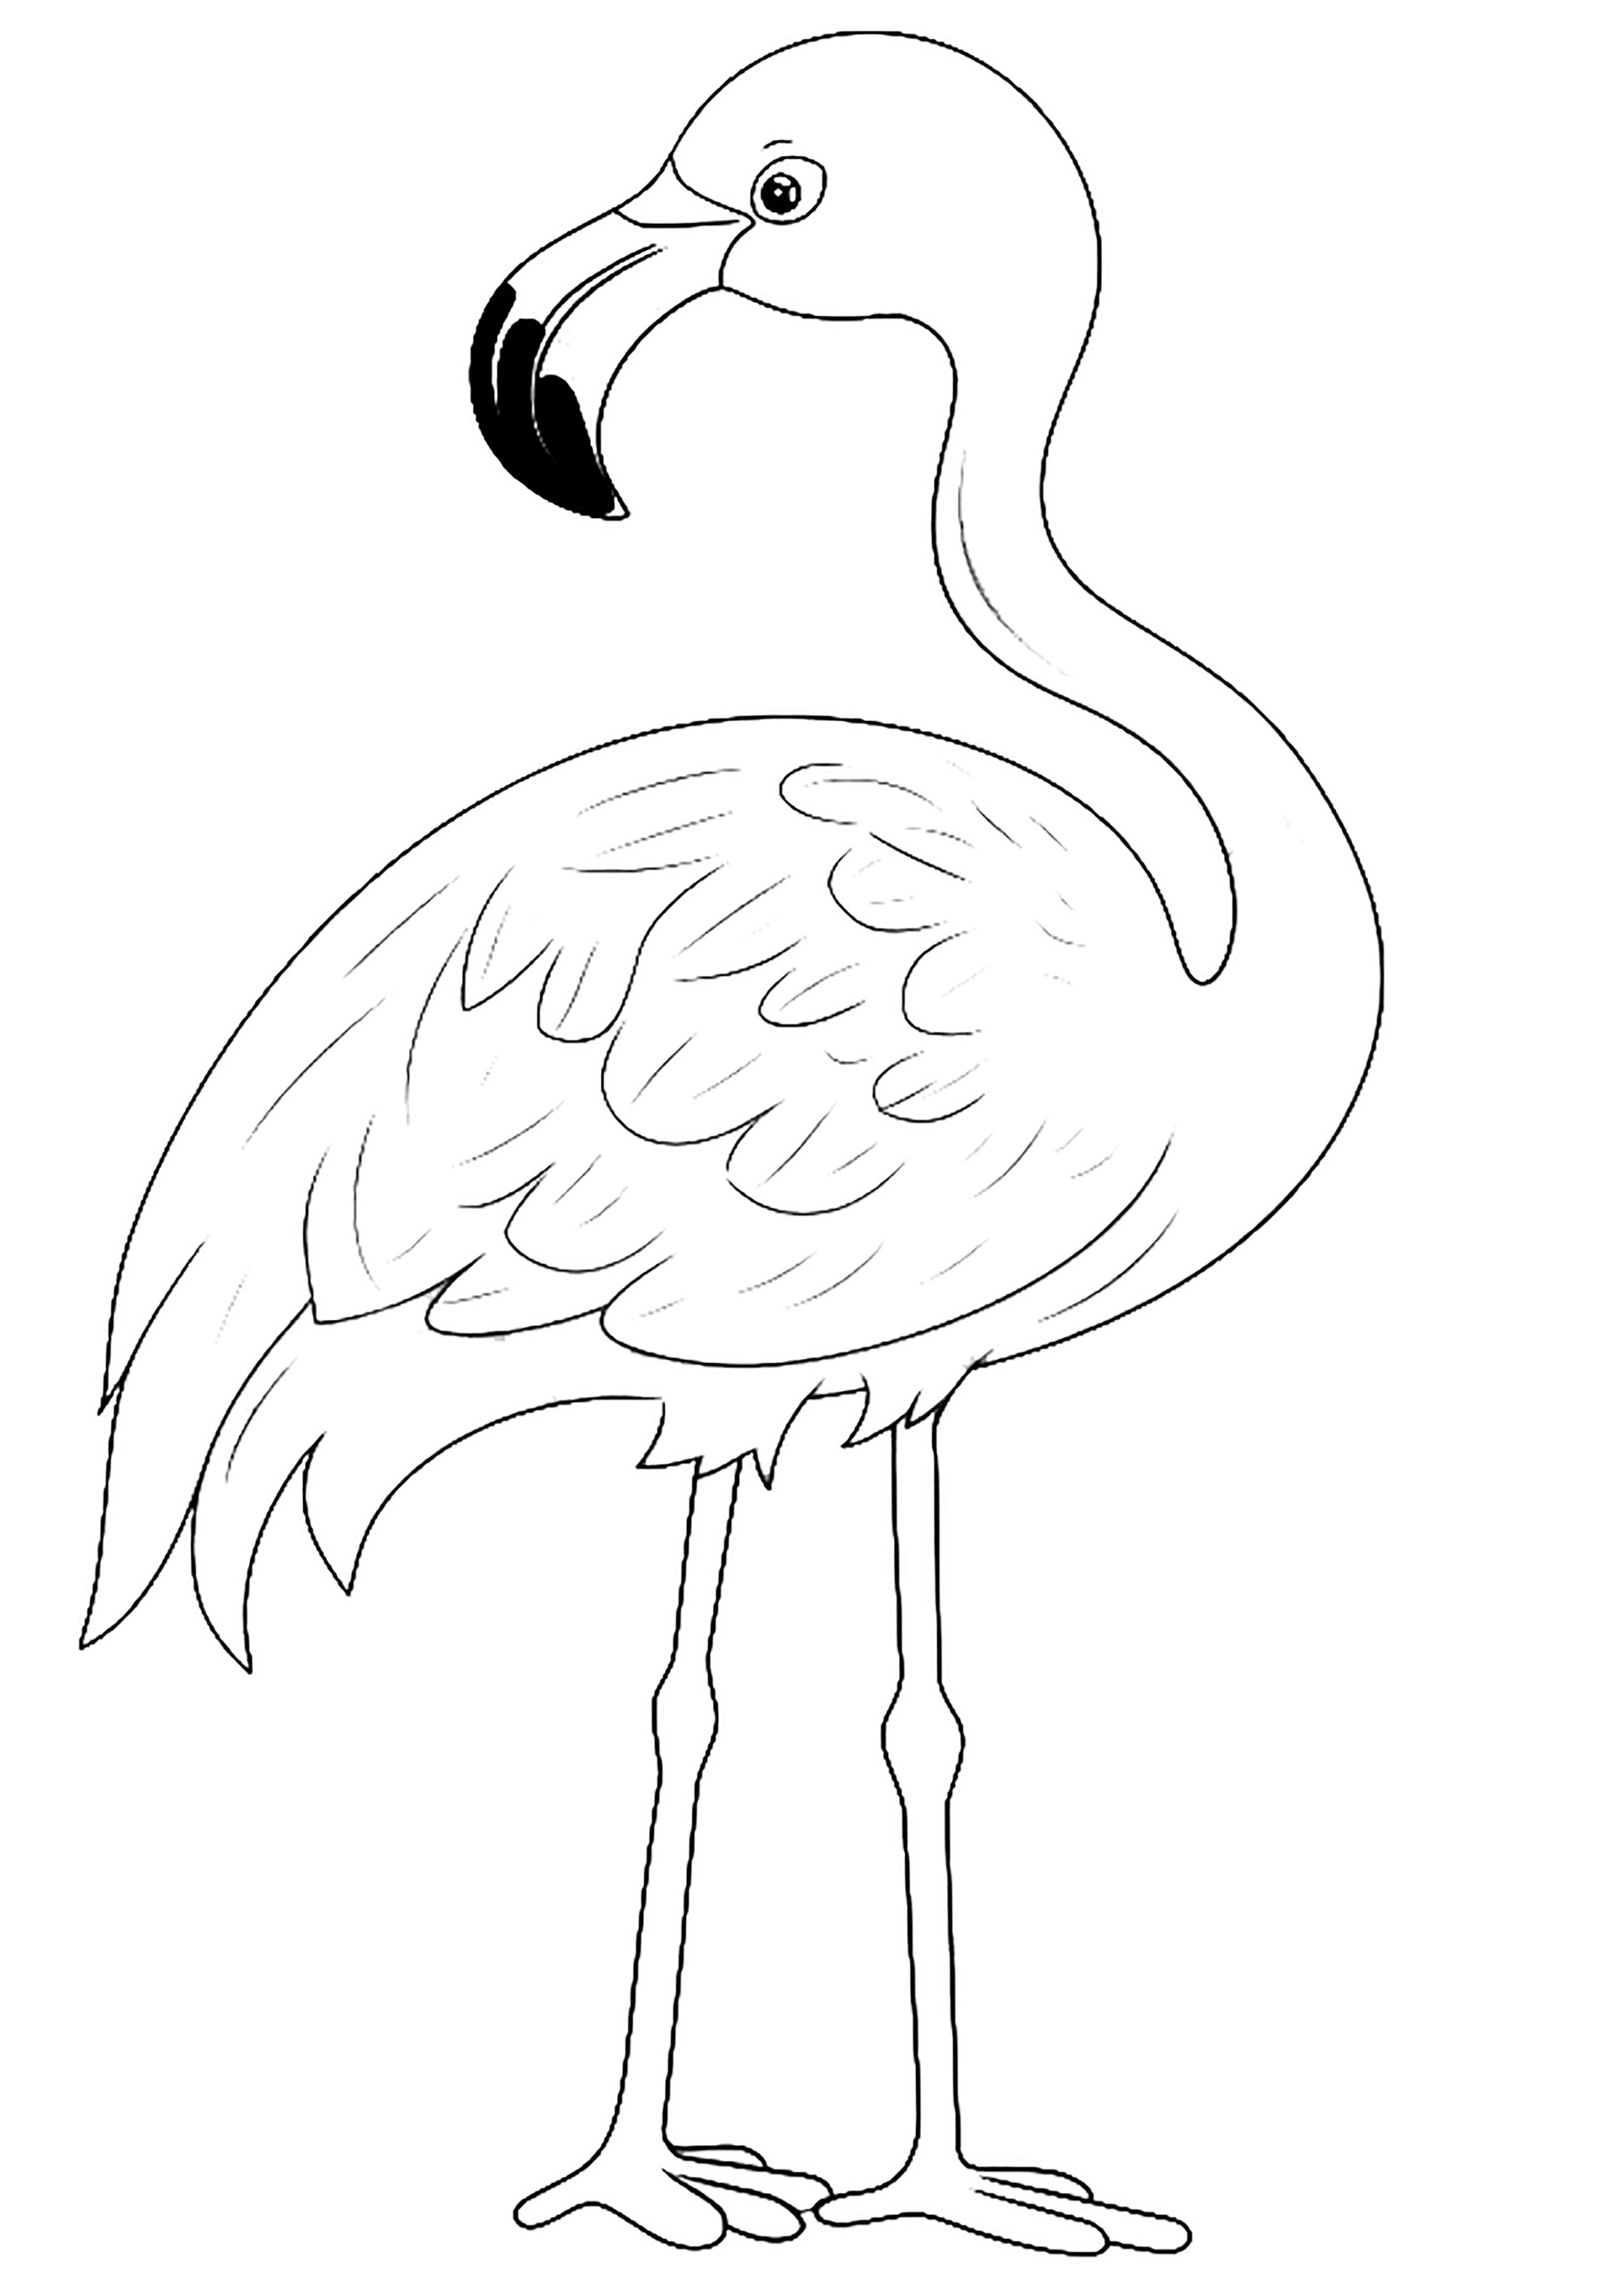 Pretty pink flamingo. Very simple coloring page